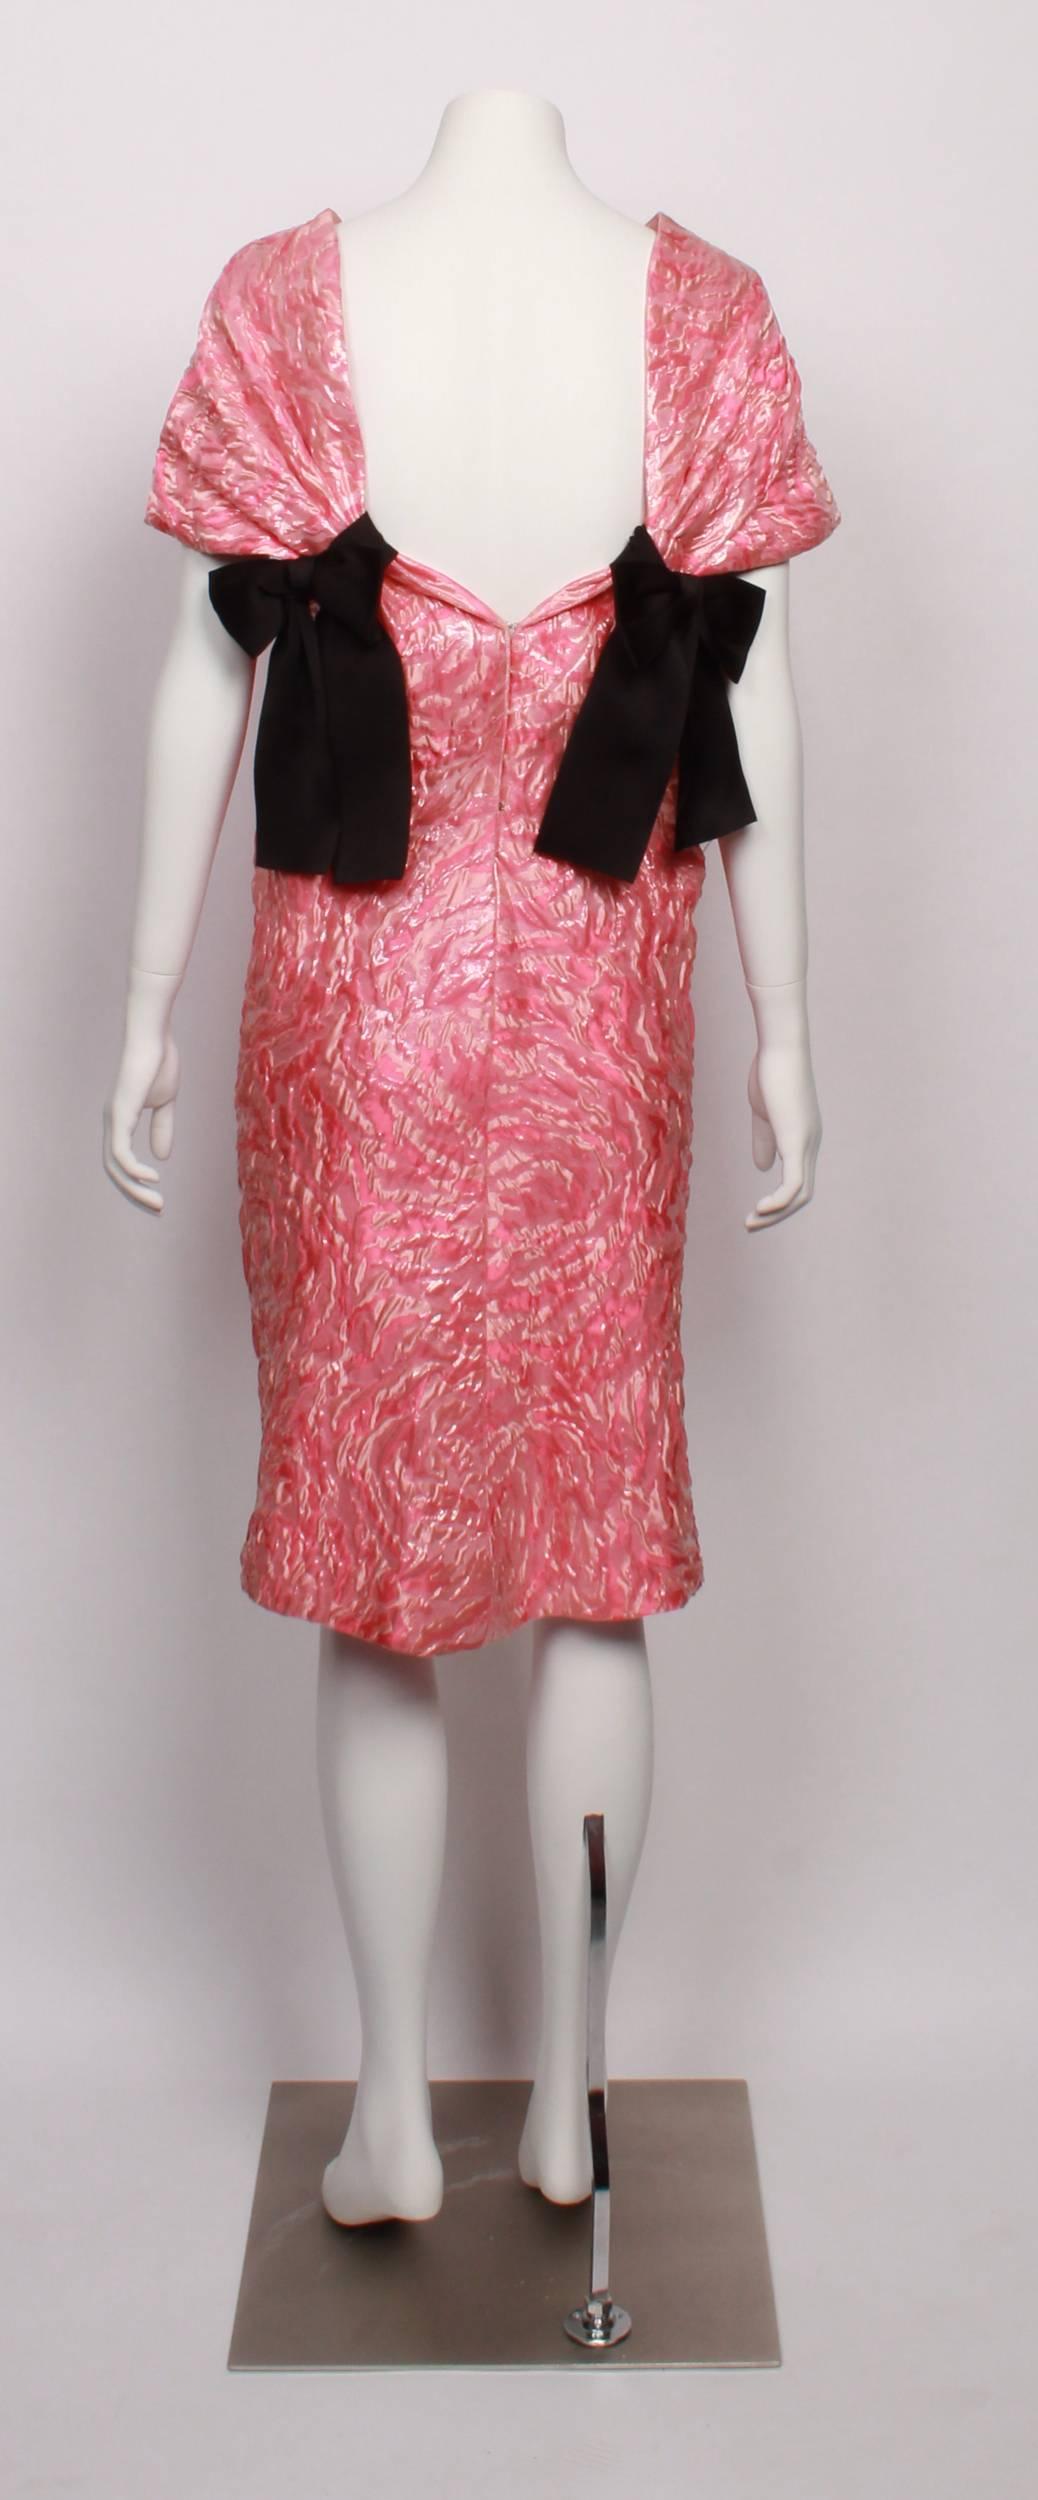 Beautiful and ultra feminine BALENCIAGA EDITION evening dress. Contemporary but true to the classic Balenciaga aesthetic. Dress is made from textured damask in pink multi shades, with black silk bow detail at back shoulder blades. Elegant boat neck